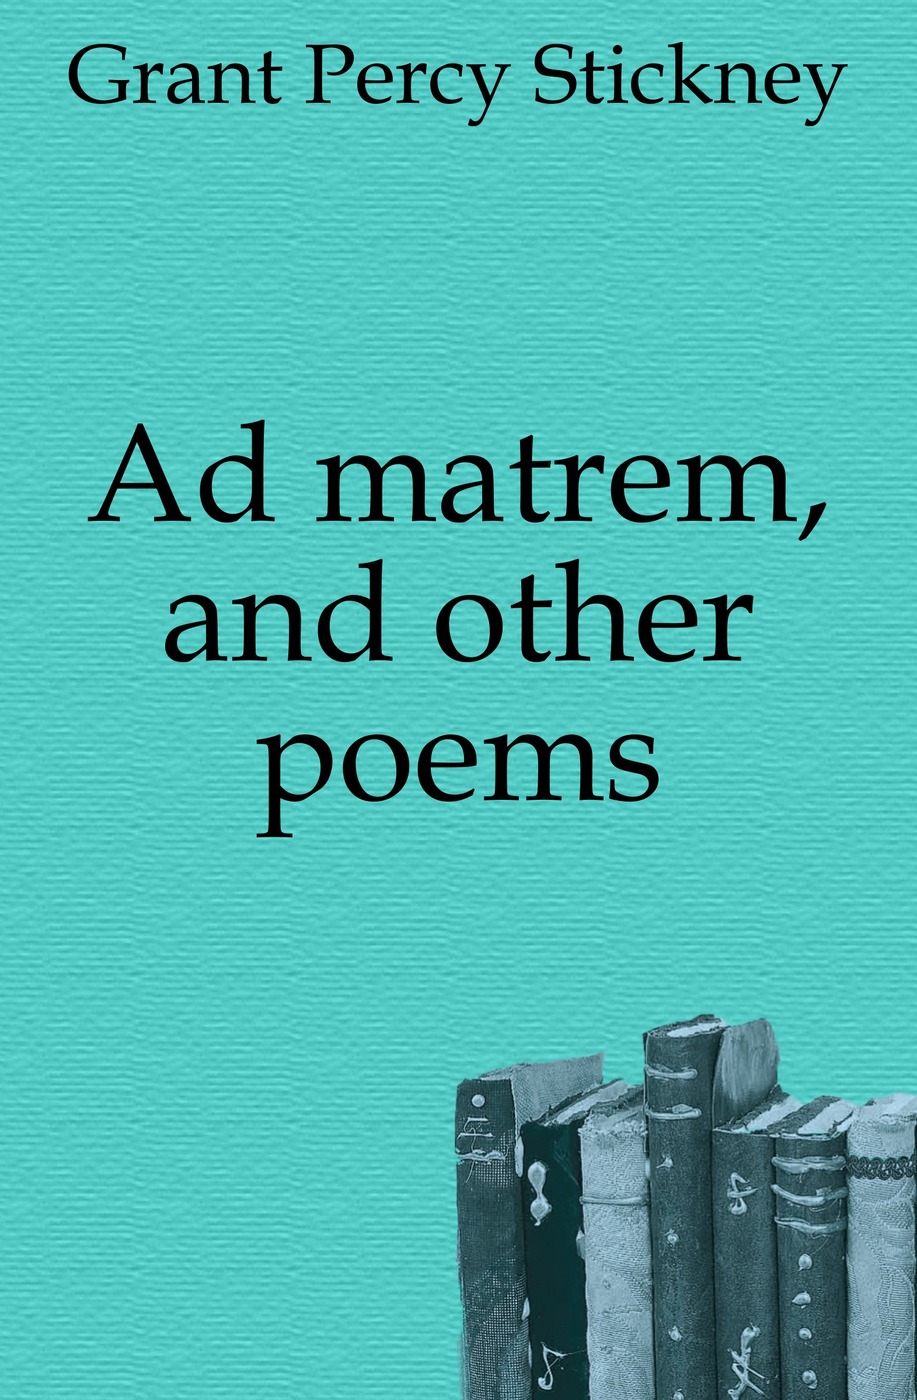 Ad matrem, and other poems